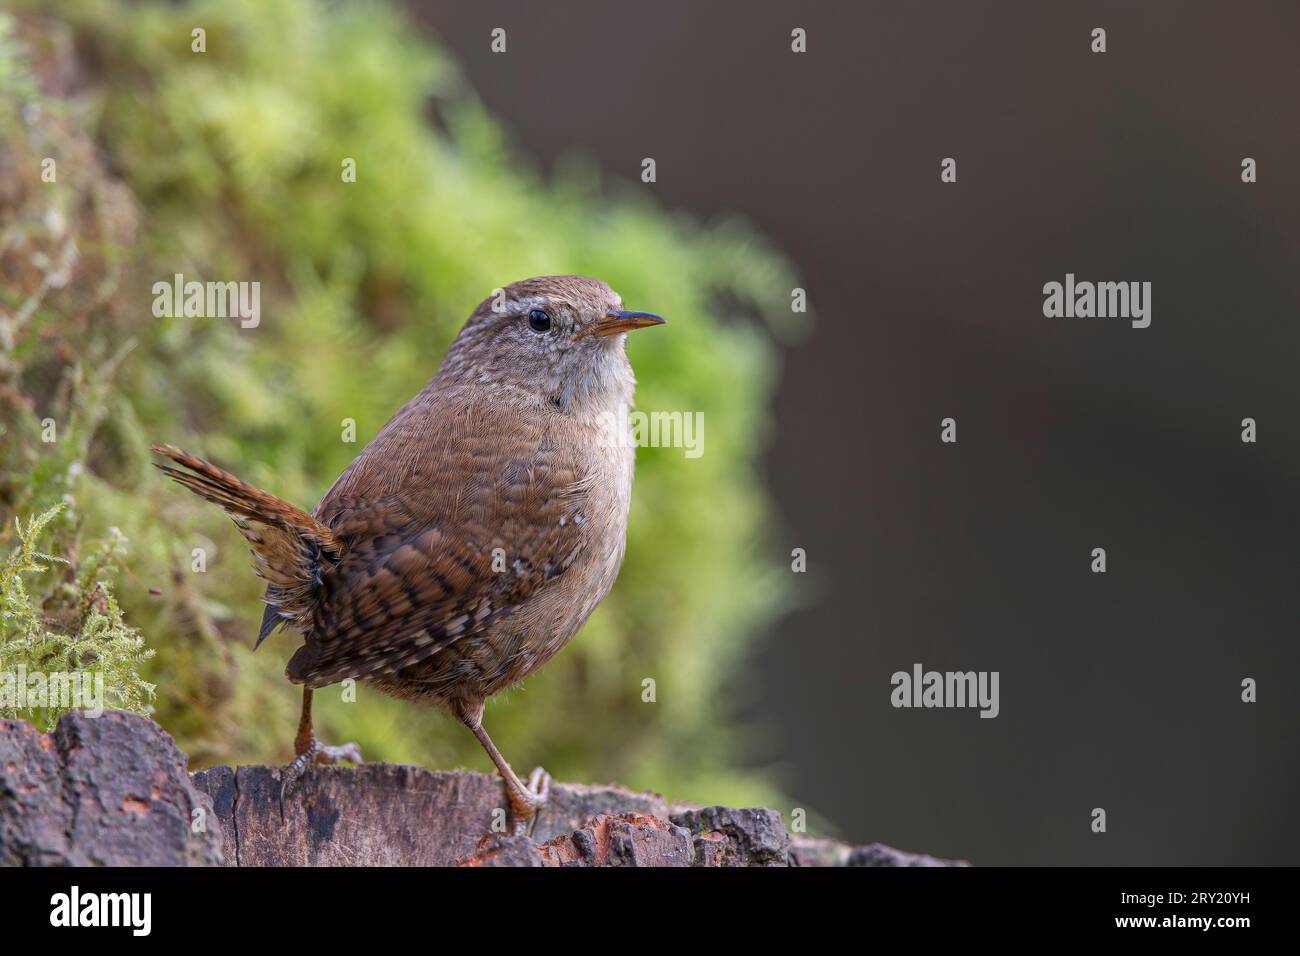 Natural close up of a UK wren bird (Troglodytes troglodytes) standing isolated on log with moss in background. Copy space to right. Stock Photo